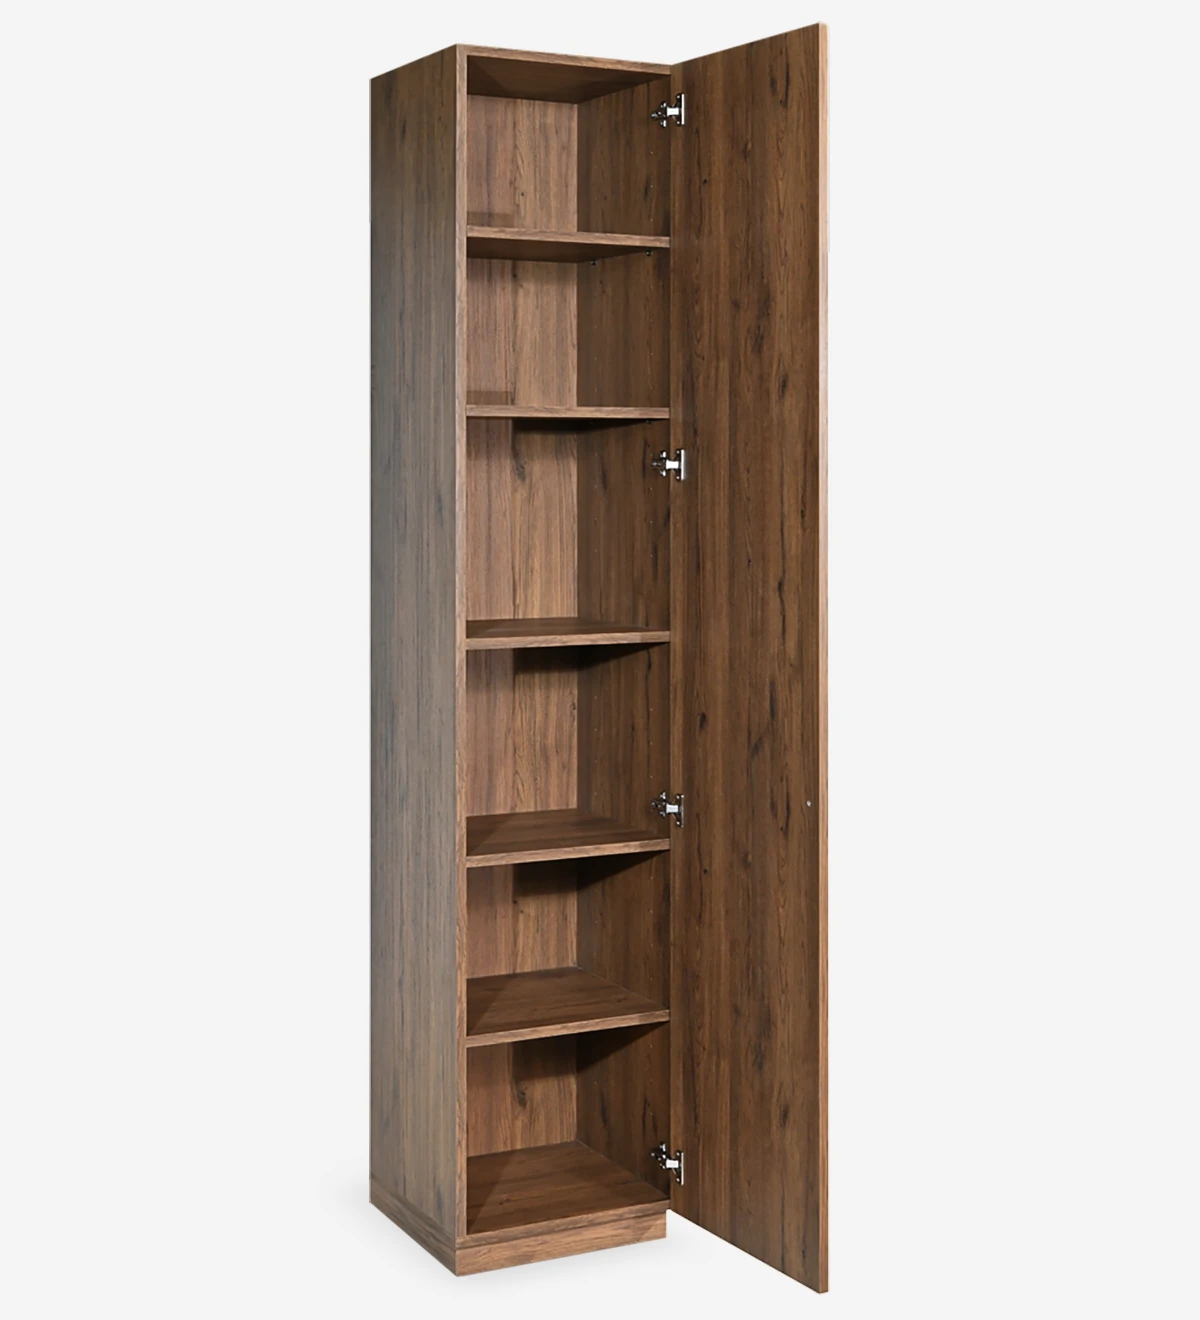 Tall bookcase in aged oak, with 1 door and removable shelves.